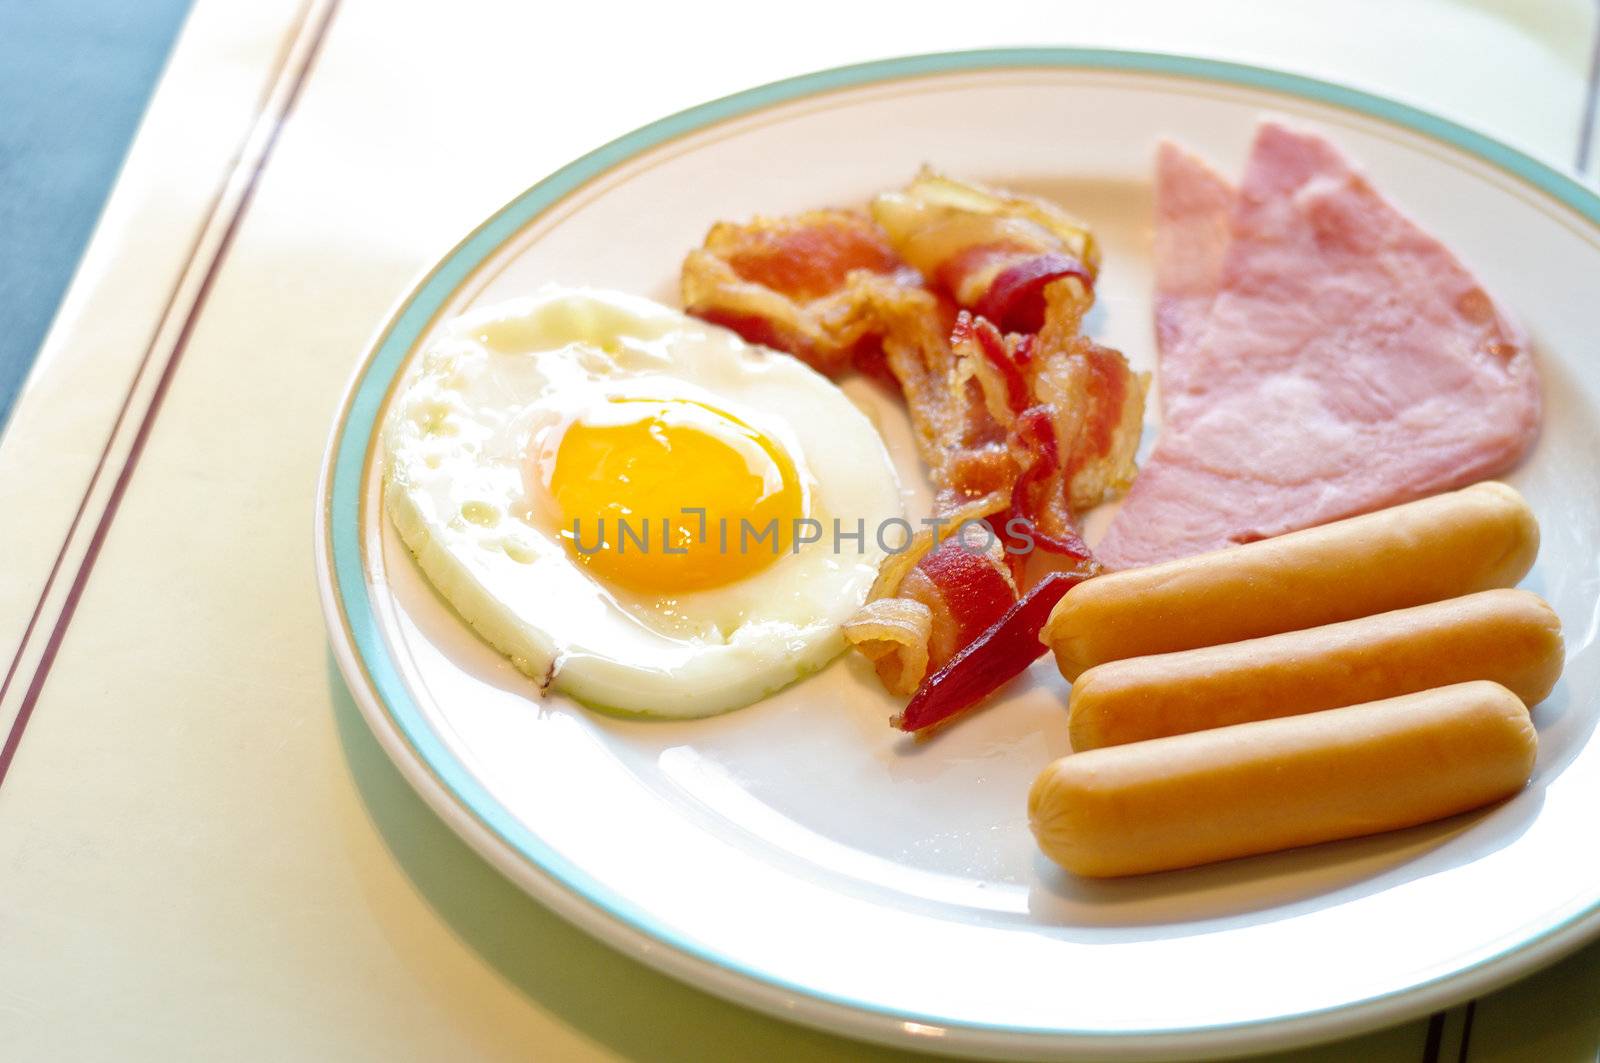 Breakfast, fried egg and sausage in white dish